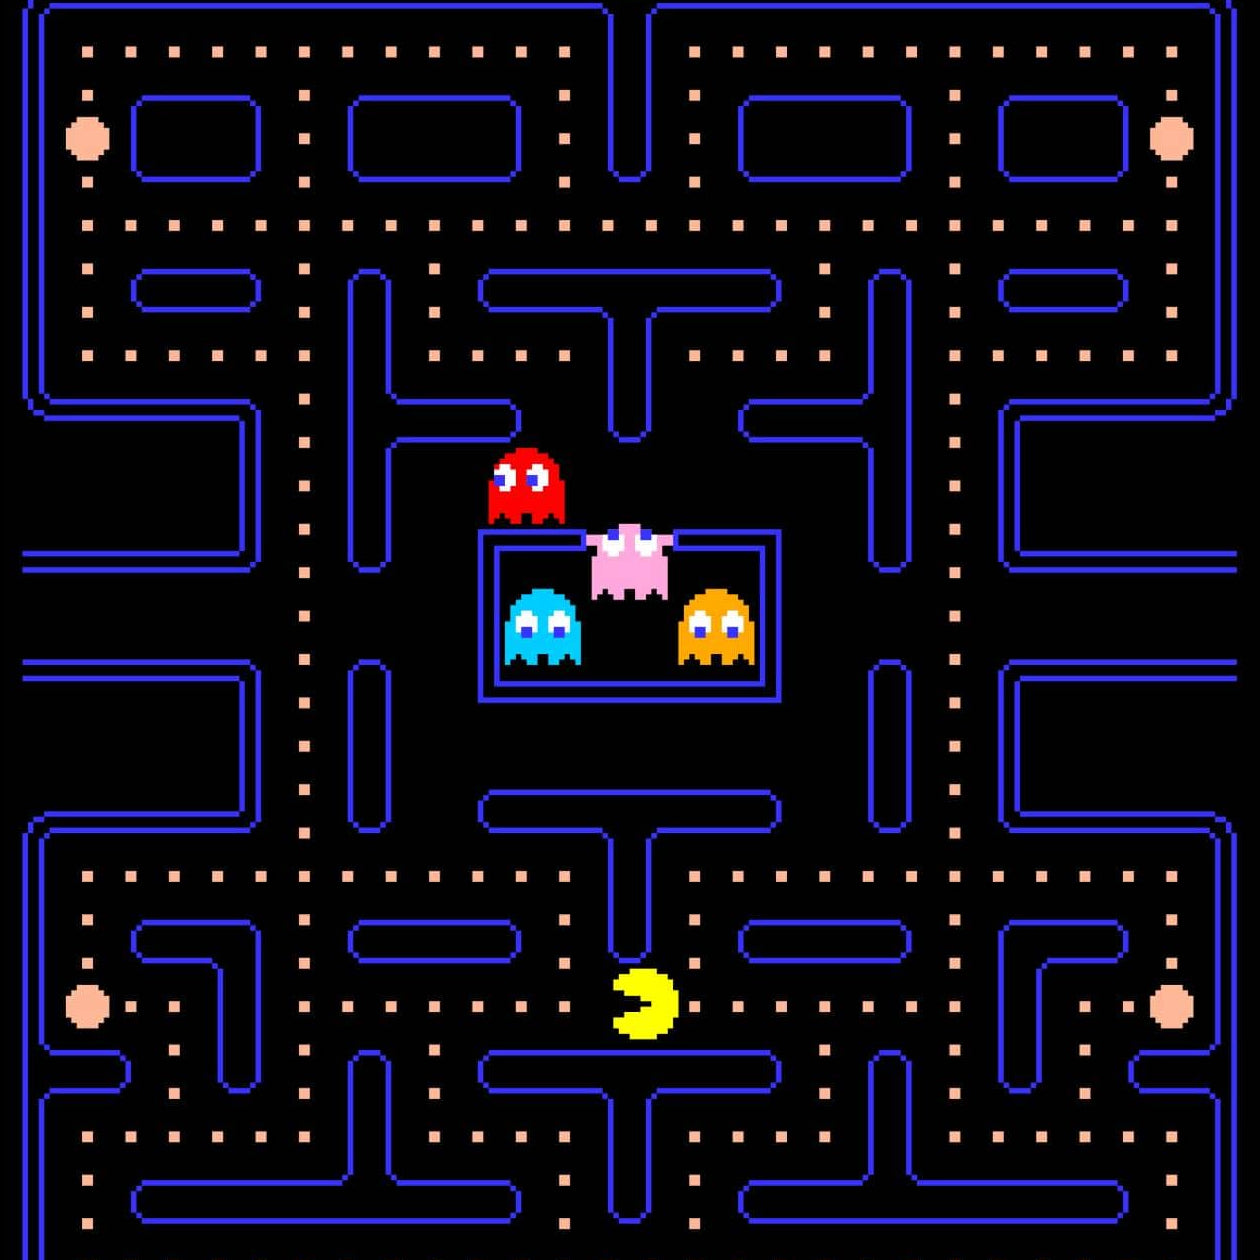 How to beat Pac Man